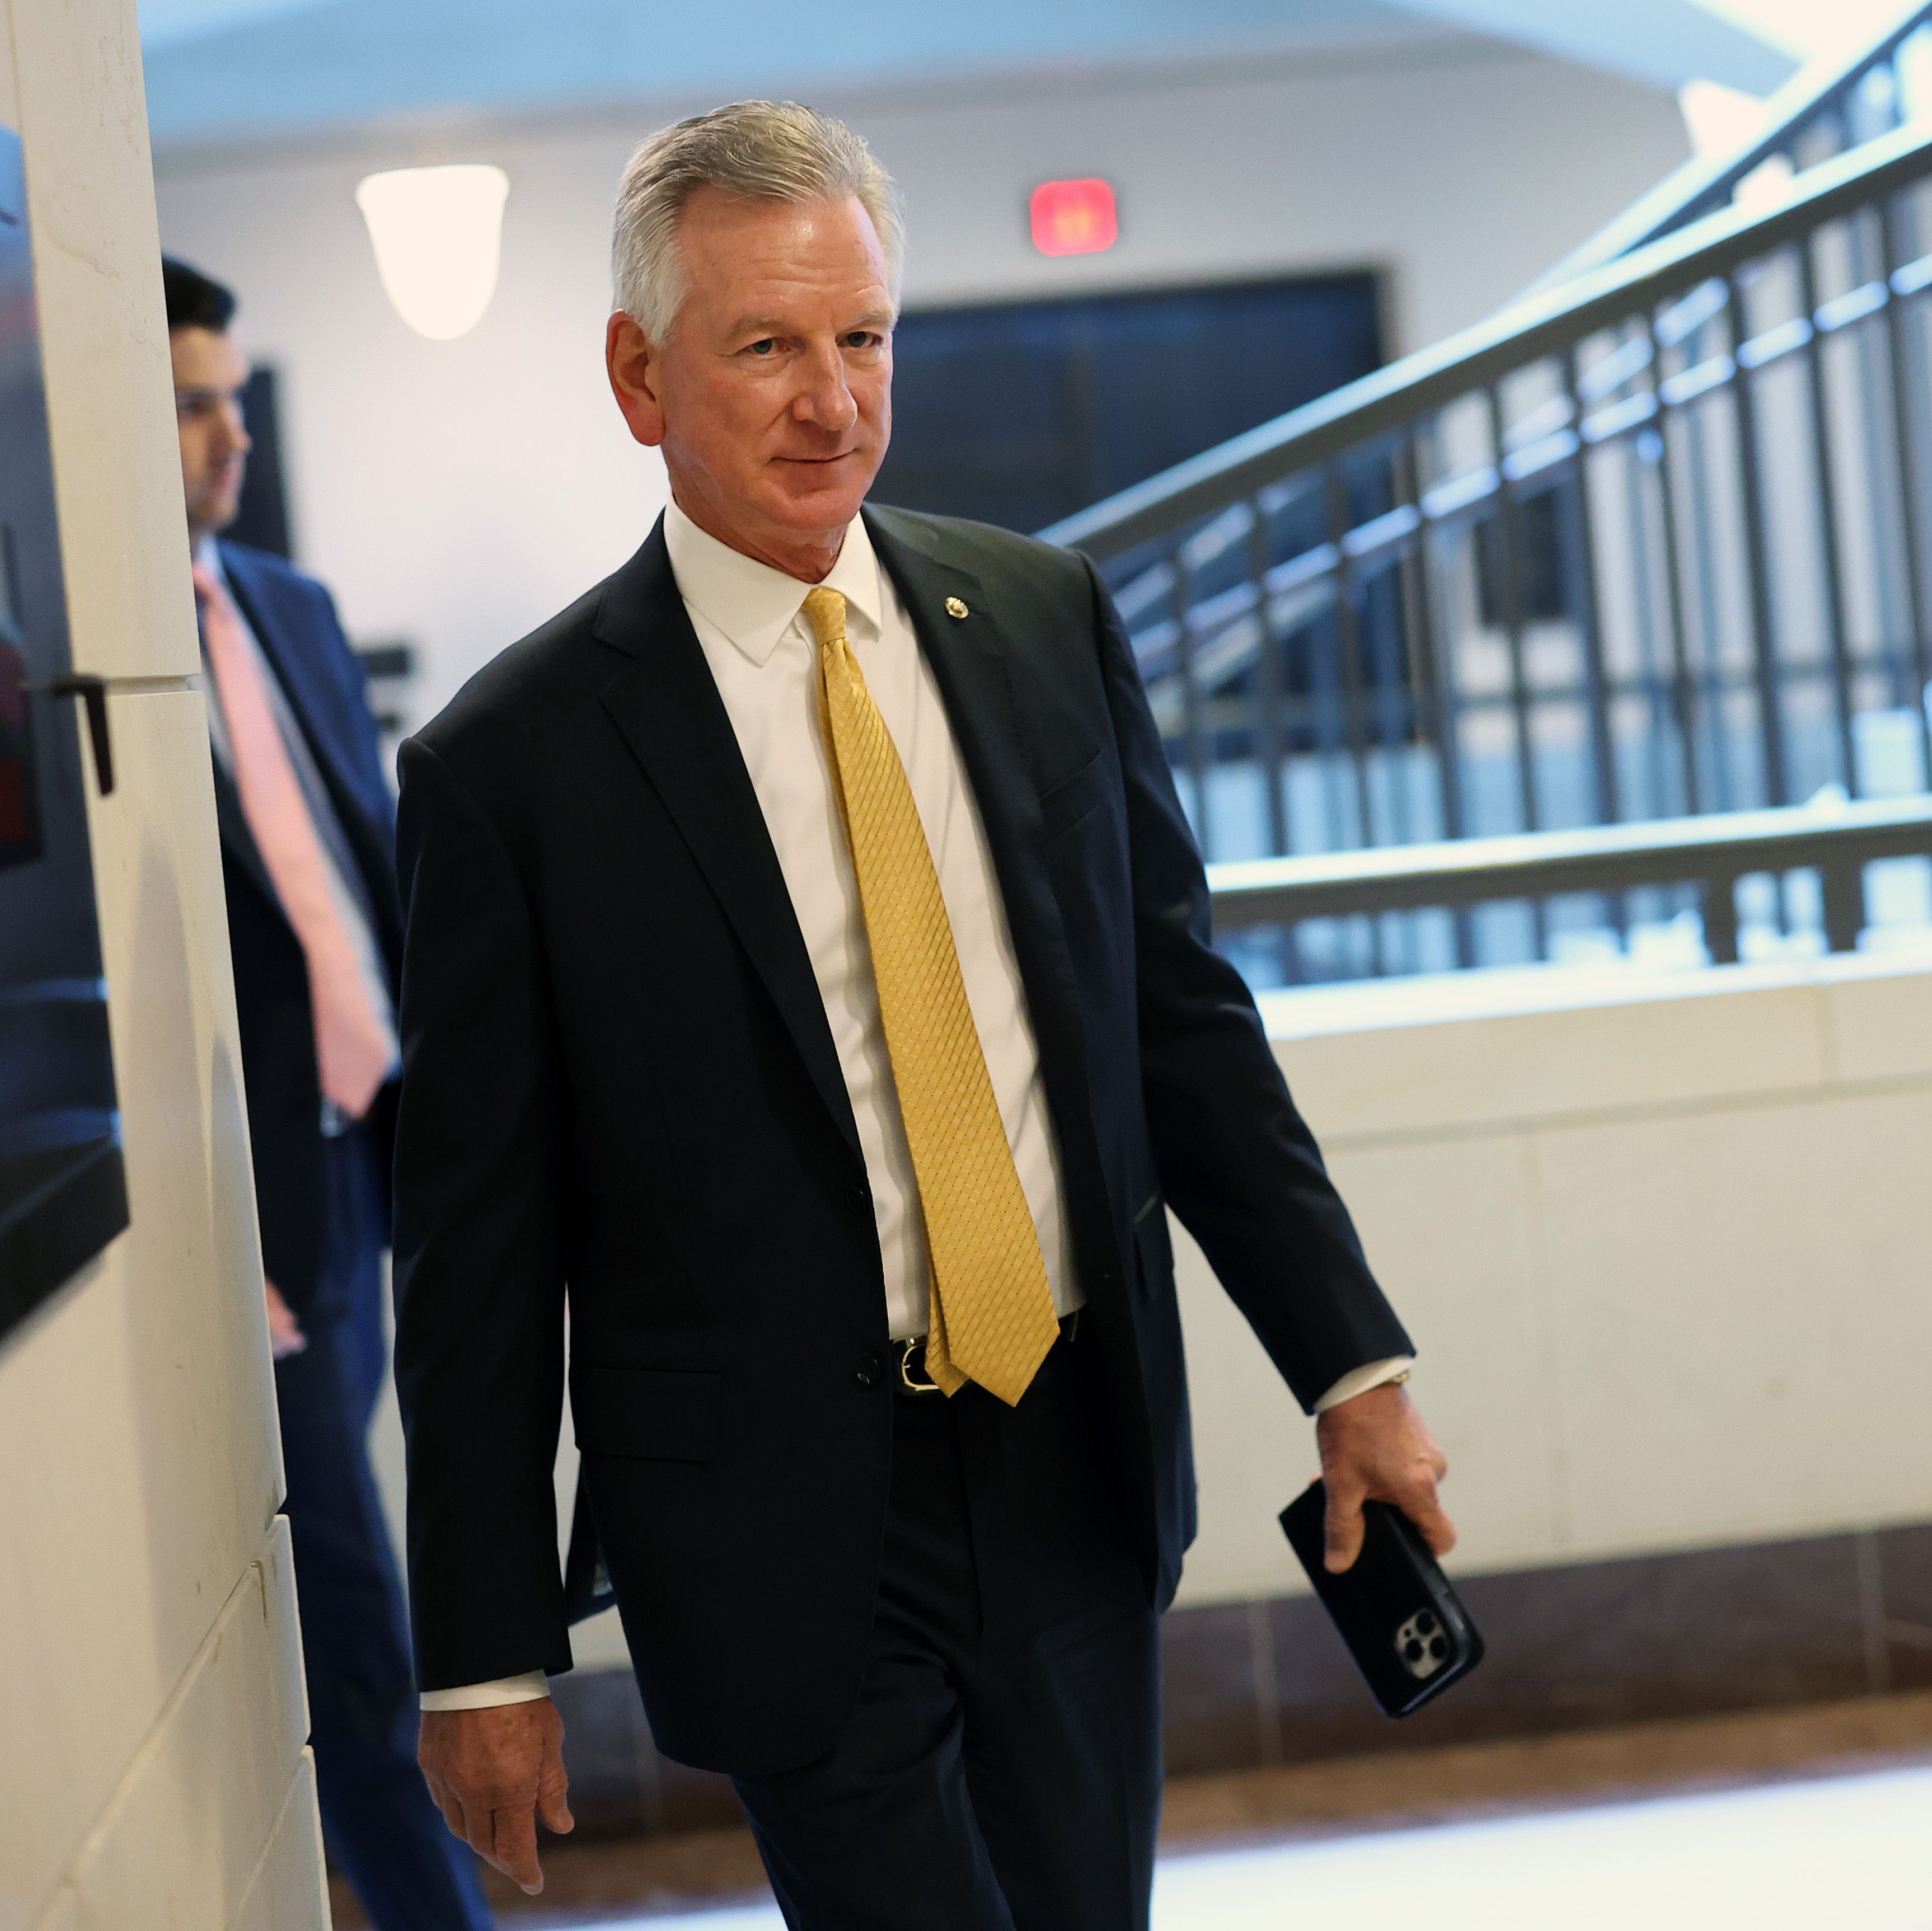 Tommy Tuberville Said the Military 'Is Not an Equal Opportunity Employer'